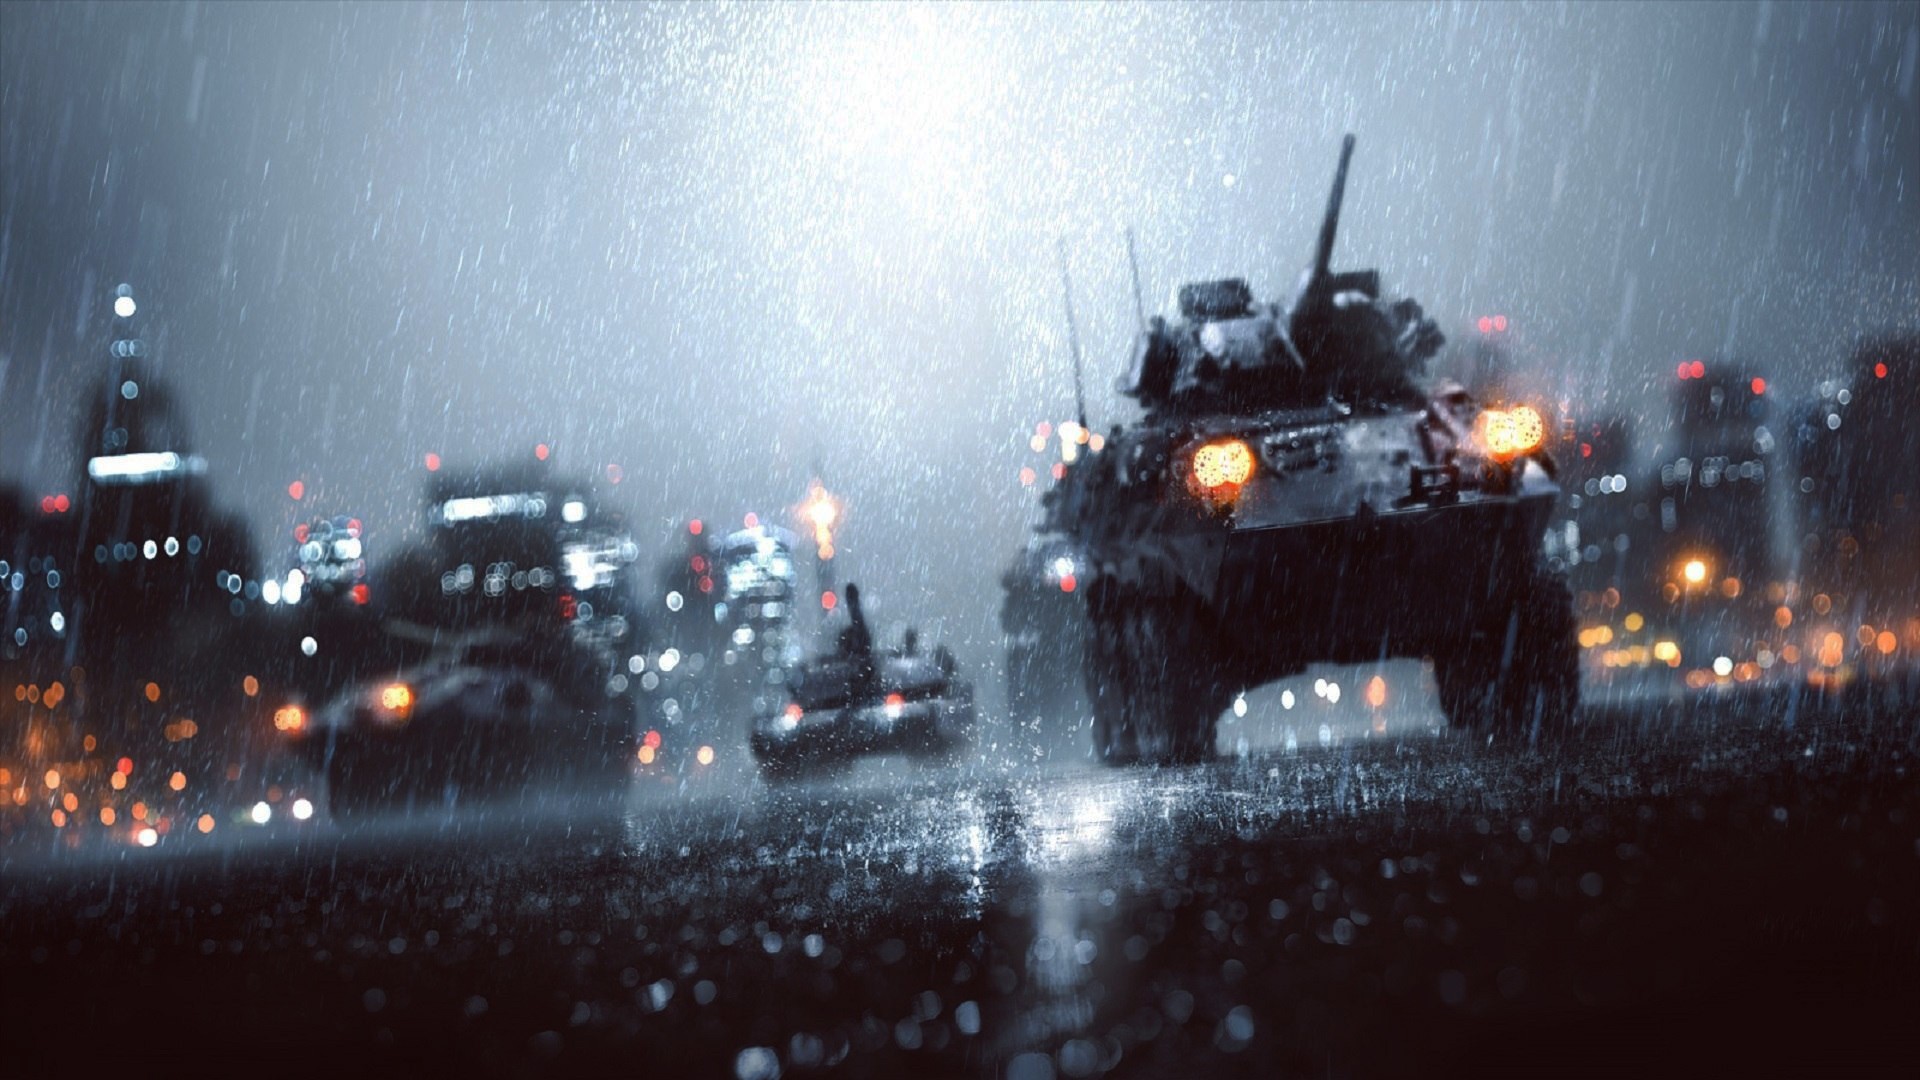 Battlefield 4 News - Battlefield 4 China Rising Expansion Free To